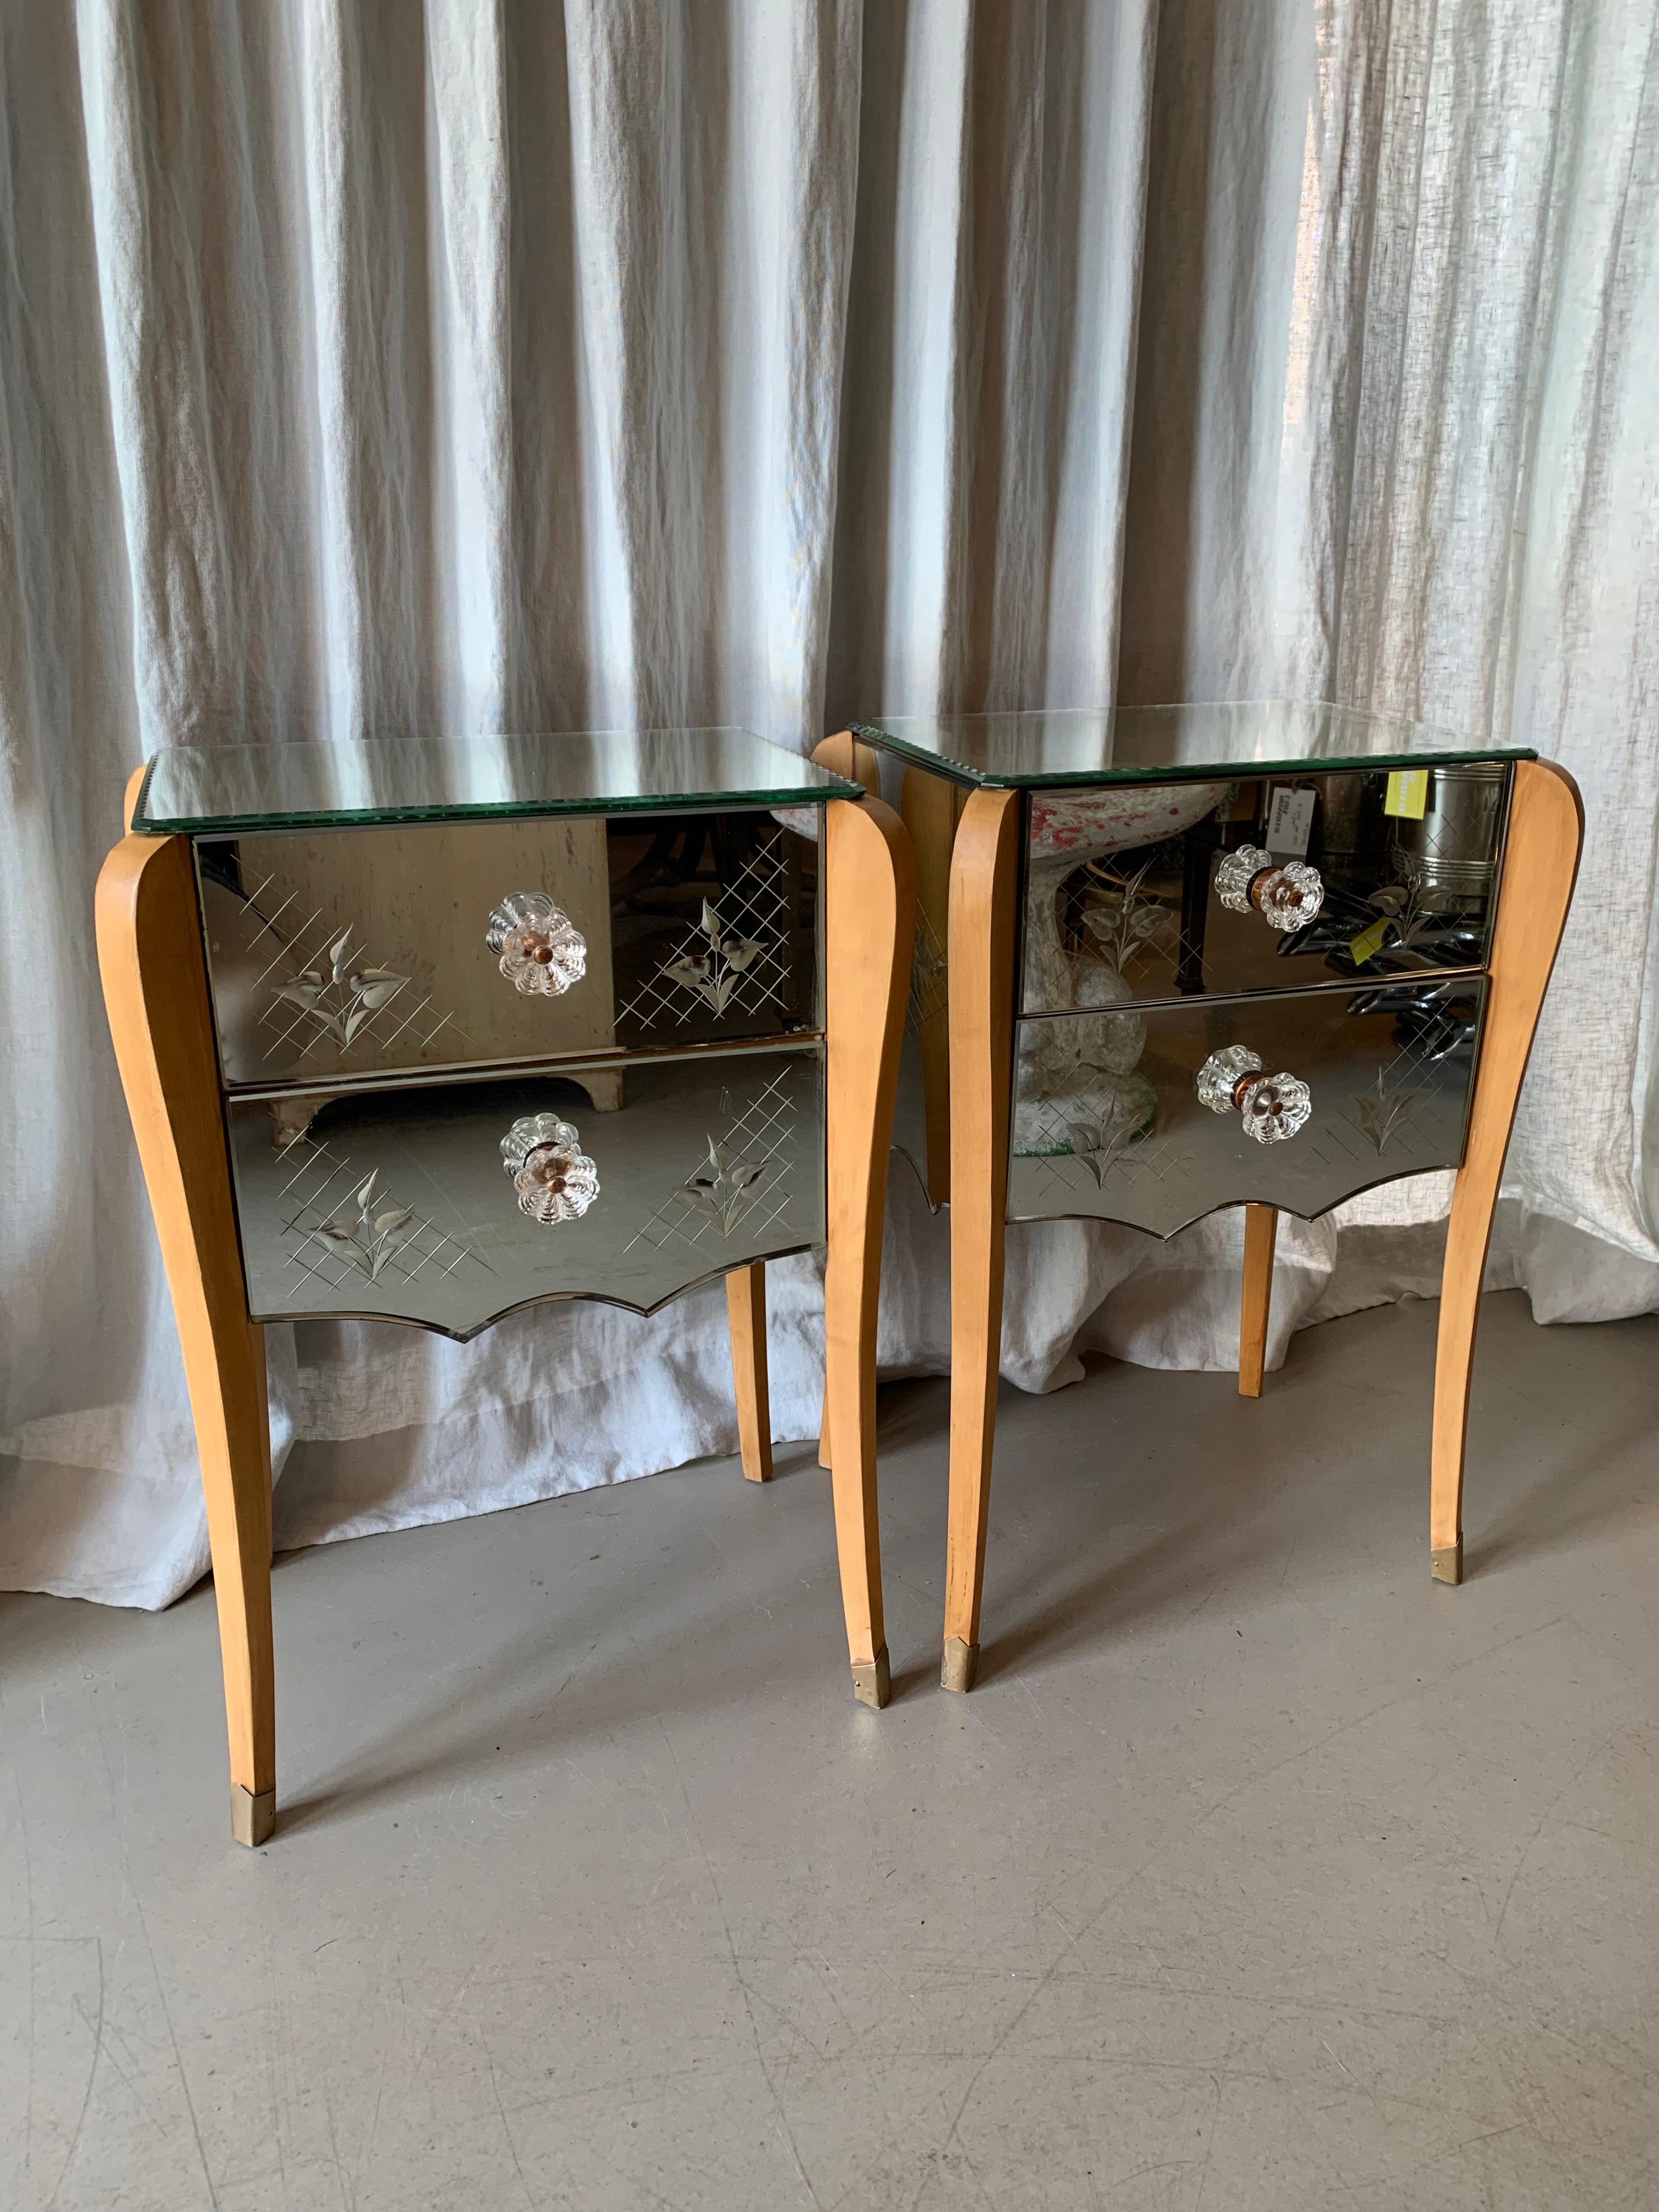 Gorgeous pair of French Venetian Style 1930s bed side tables with floral engraved and cut decoration in the mirror glass. The set has patina, especially on one table top - but both tables are in good condition with no nicks or cuts.